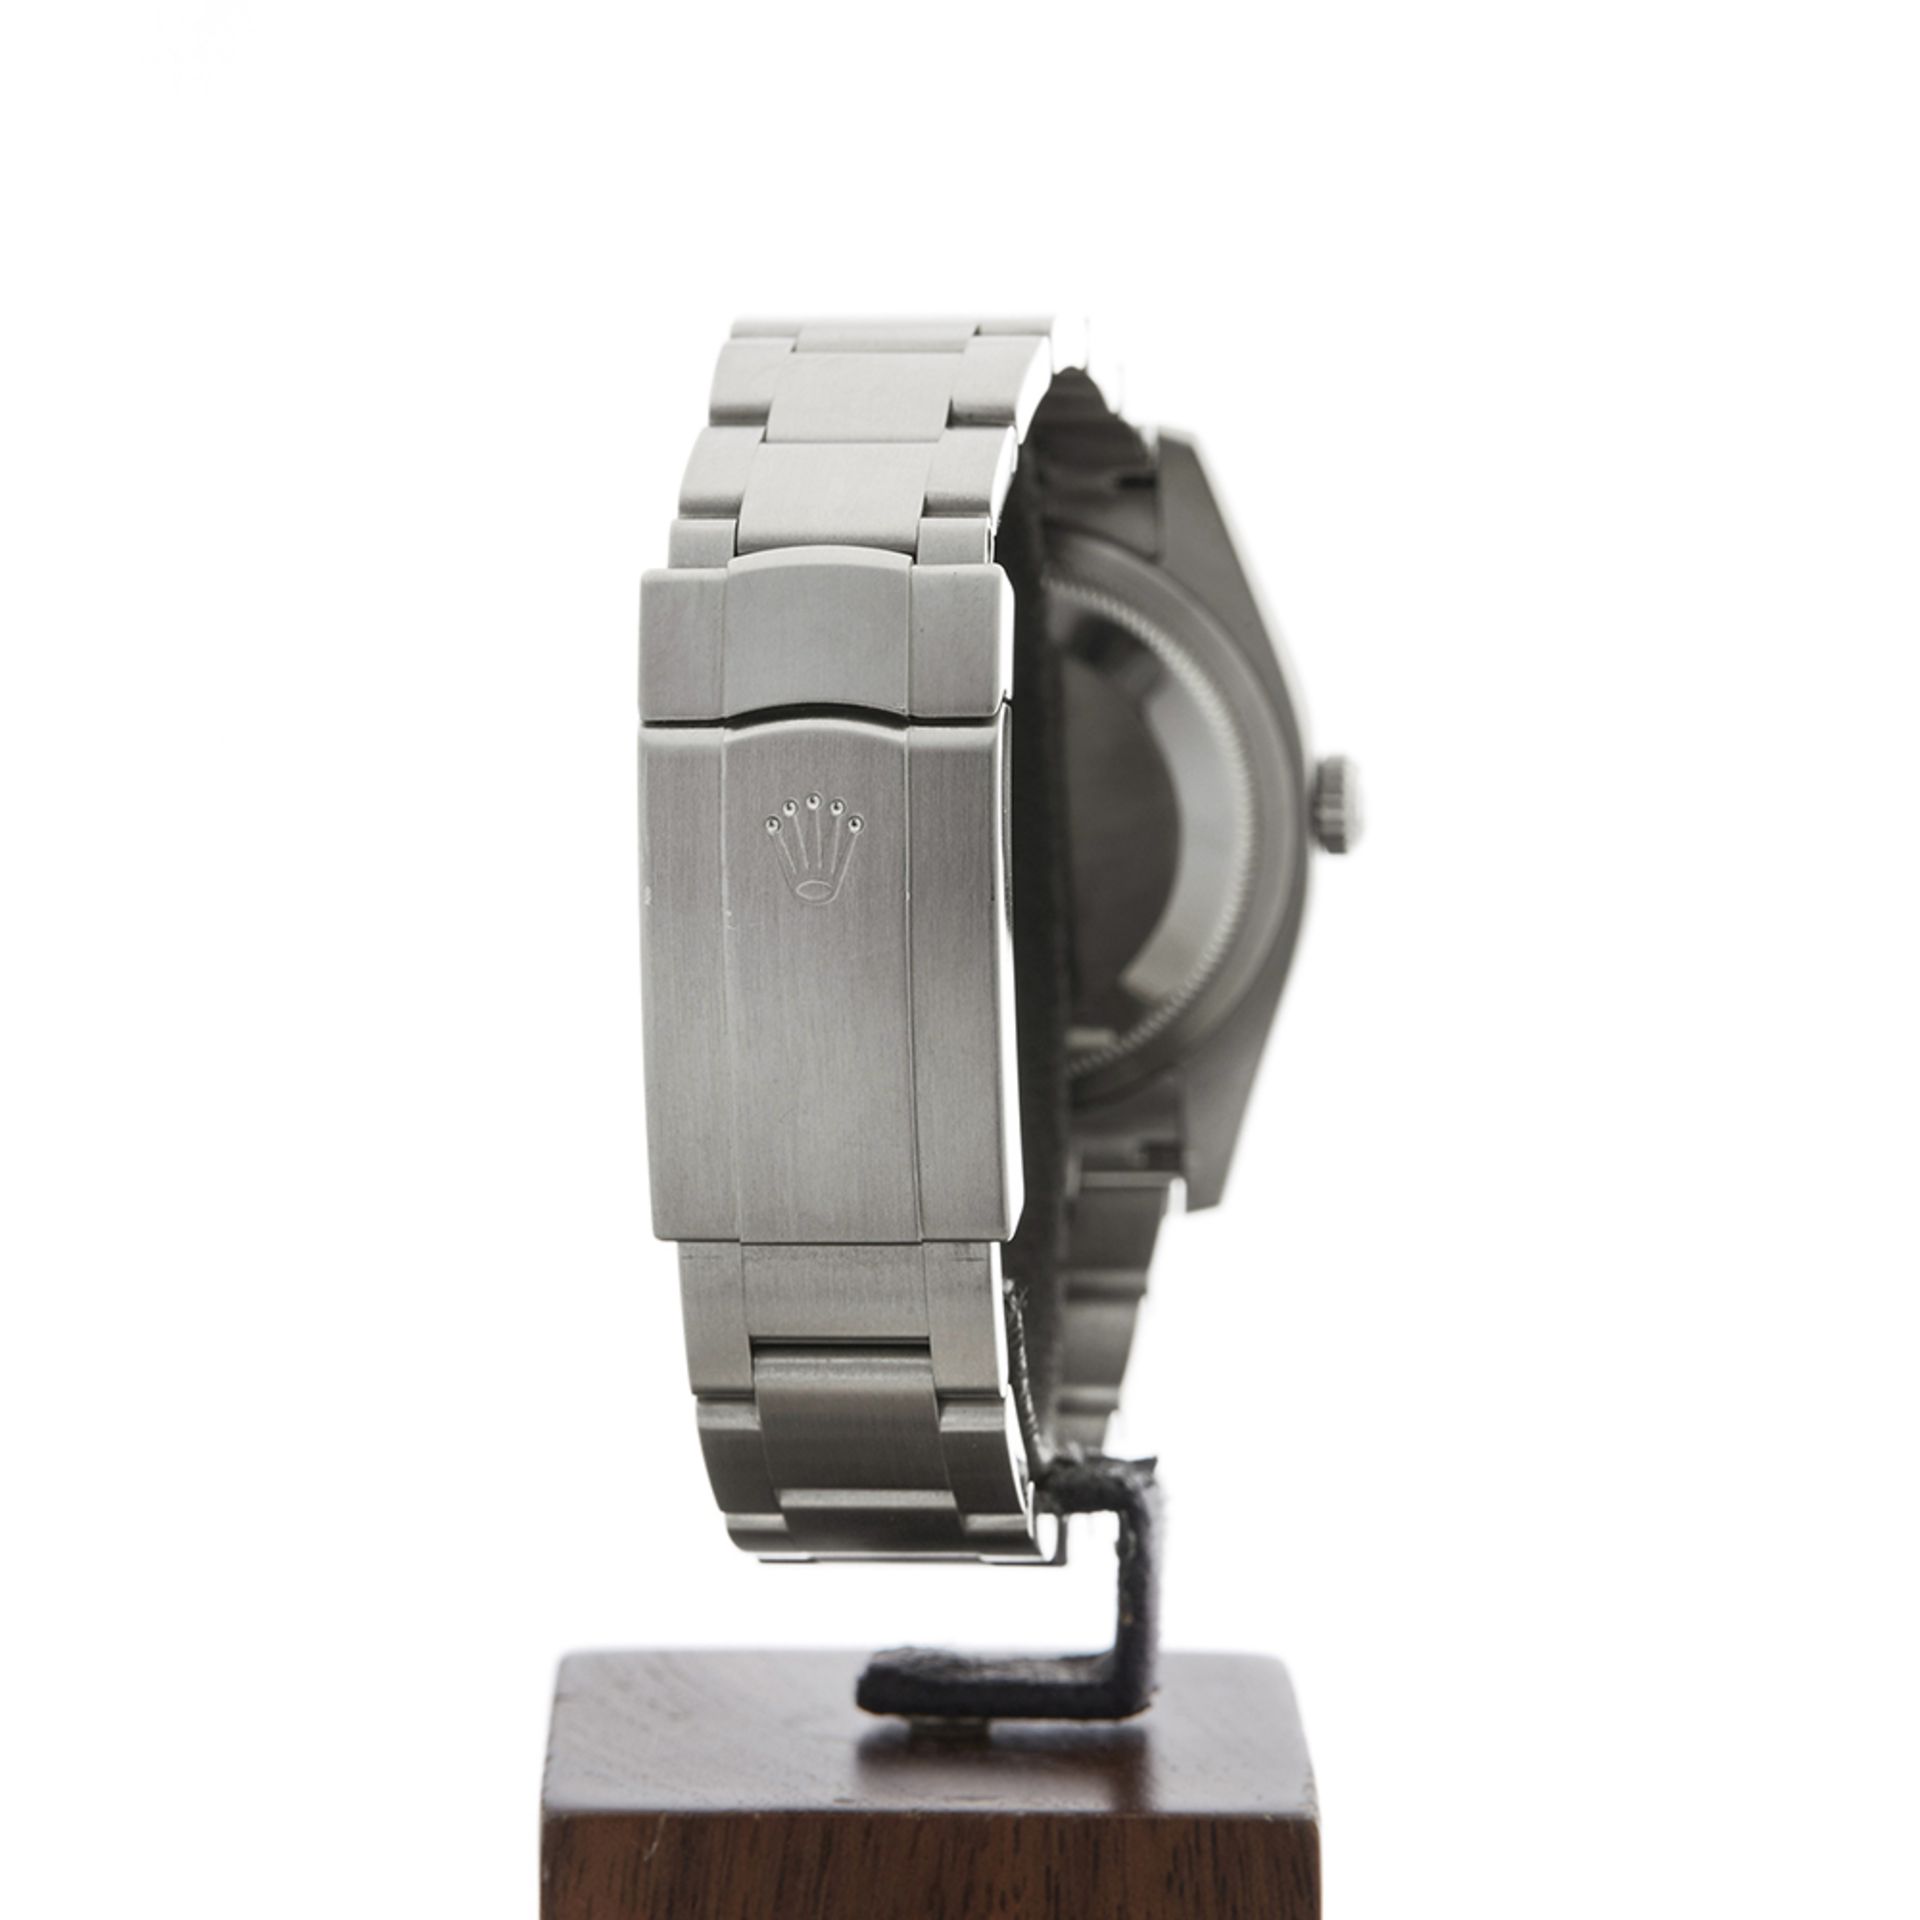 Oyster Perpetual 36mm Stainless Steel - 116034 - Image 7 of 9